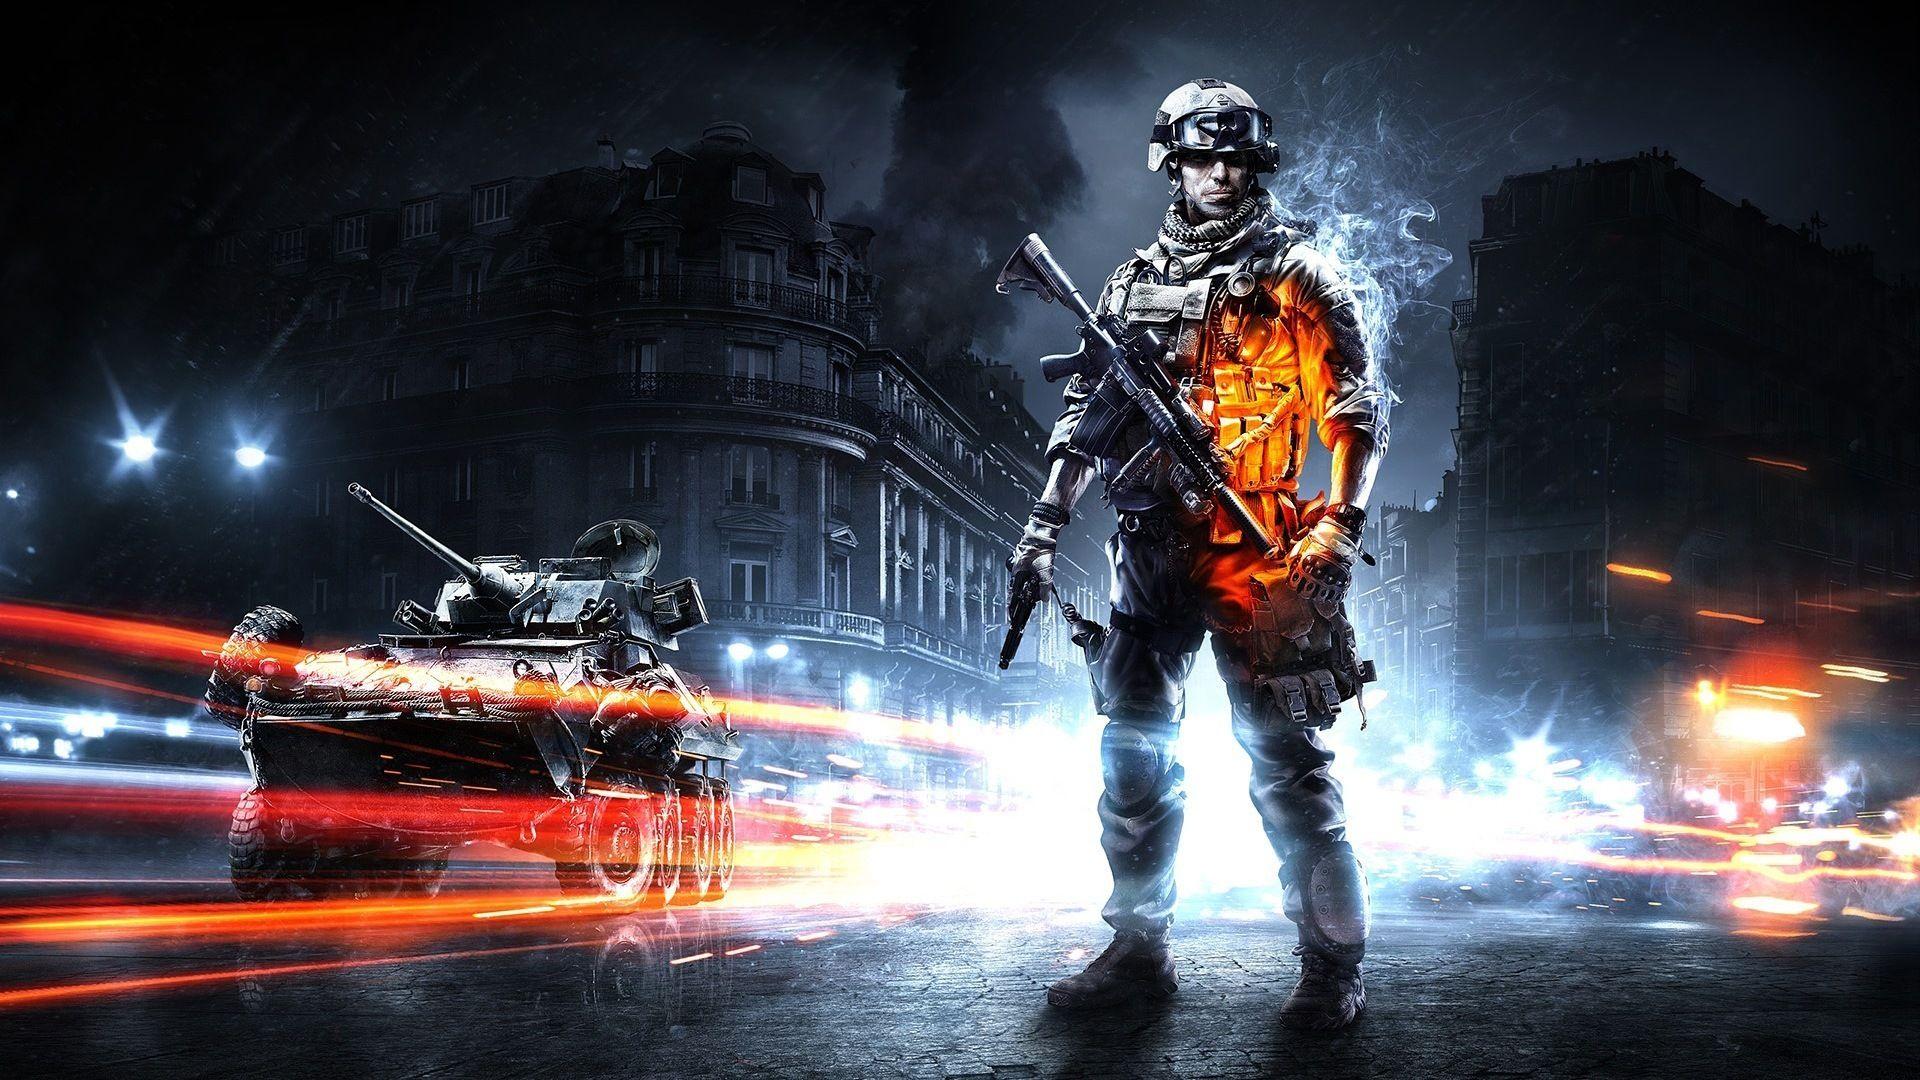 Battlefield 3 Full HD Wallpaper and Background Imagex1080